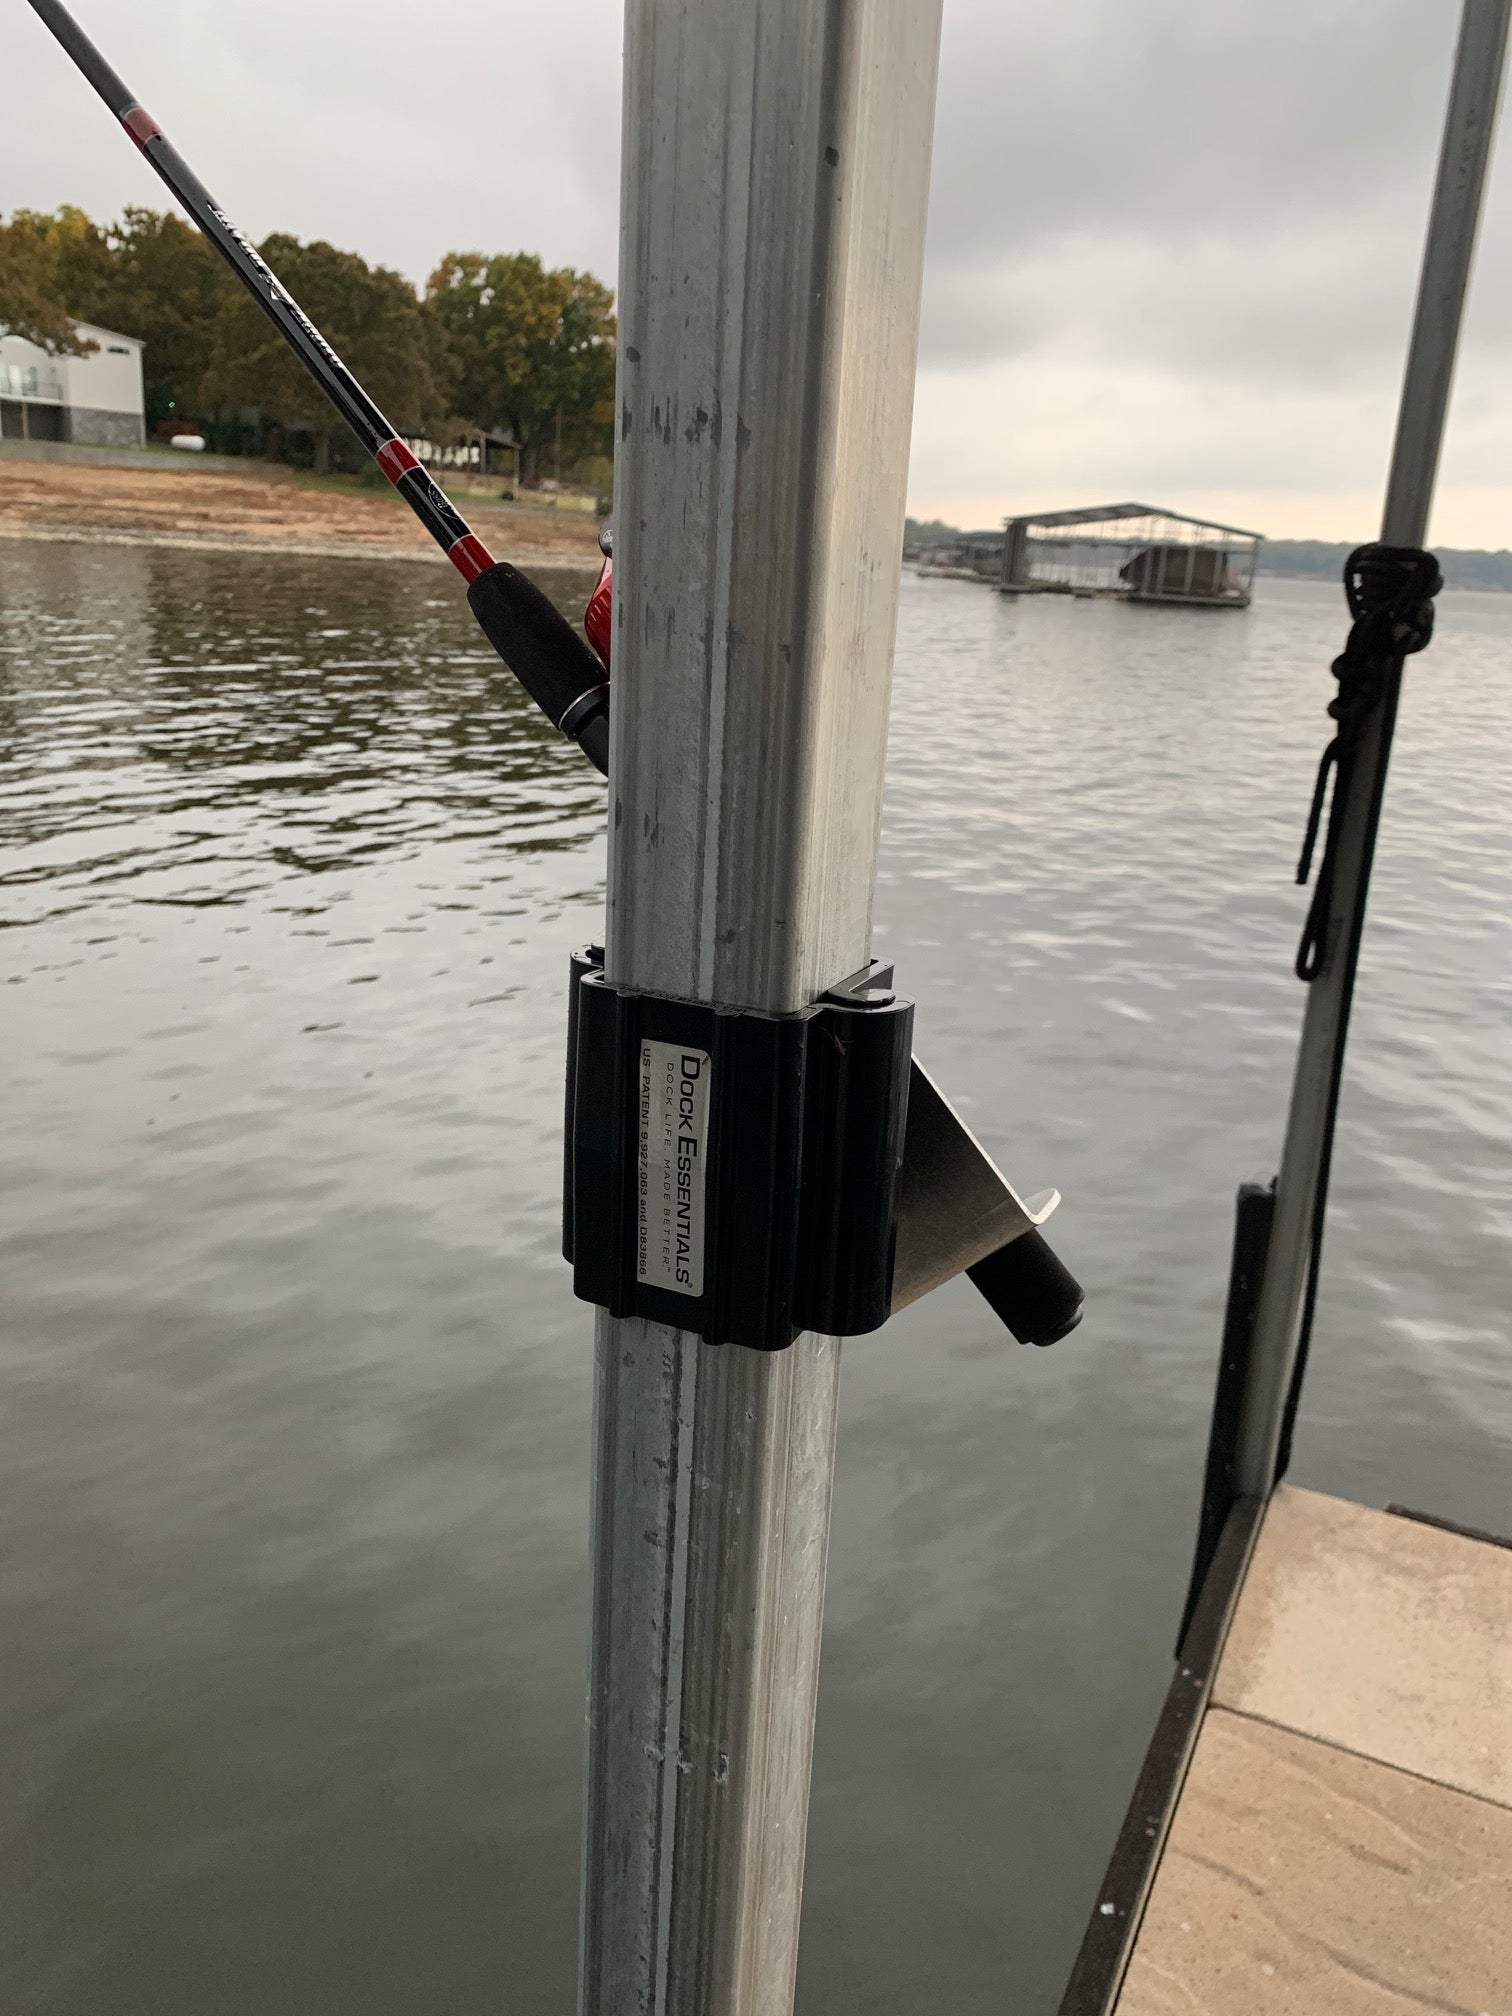 90 Degree Fishing Rod Holder with Adapter for Round Dock Posts Made in USA